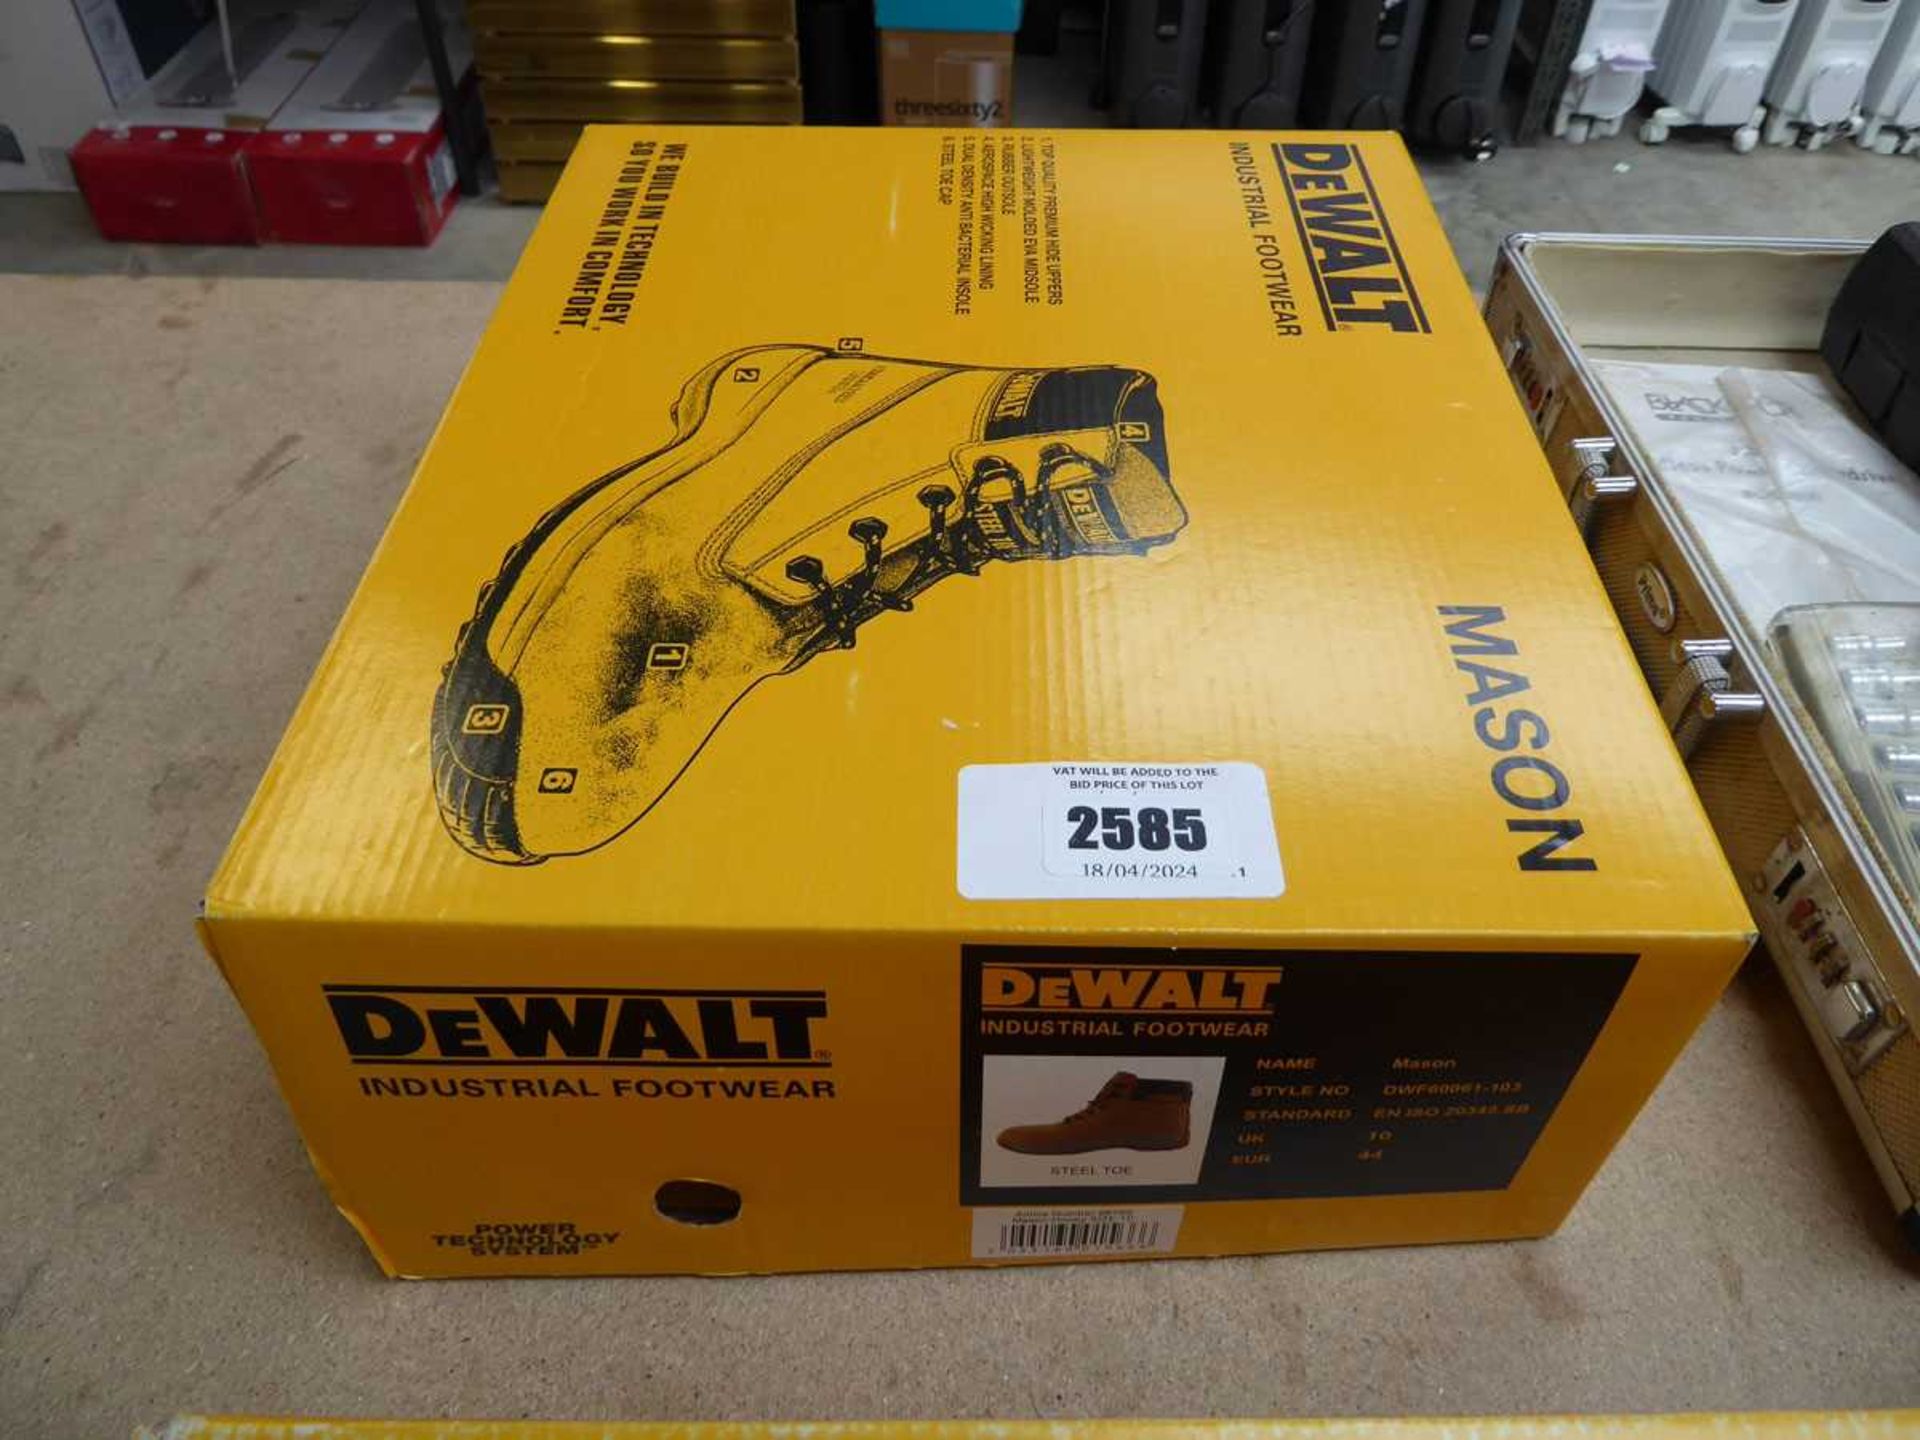 Boxed pair of DeWalt Mason steel toe safety boots in tan (size UK 10)